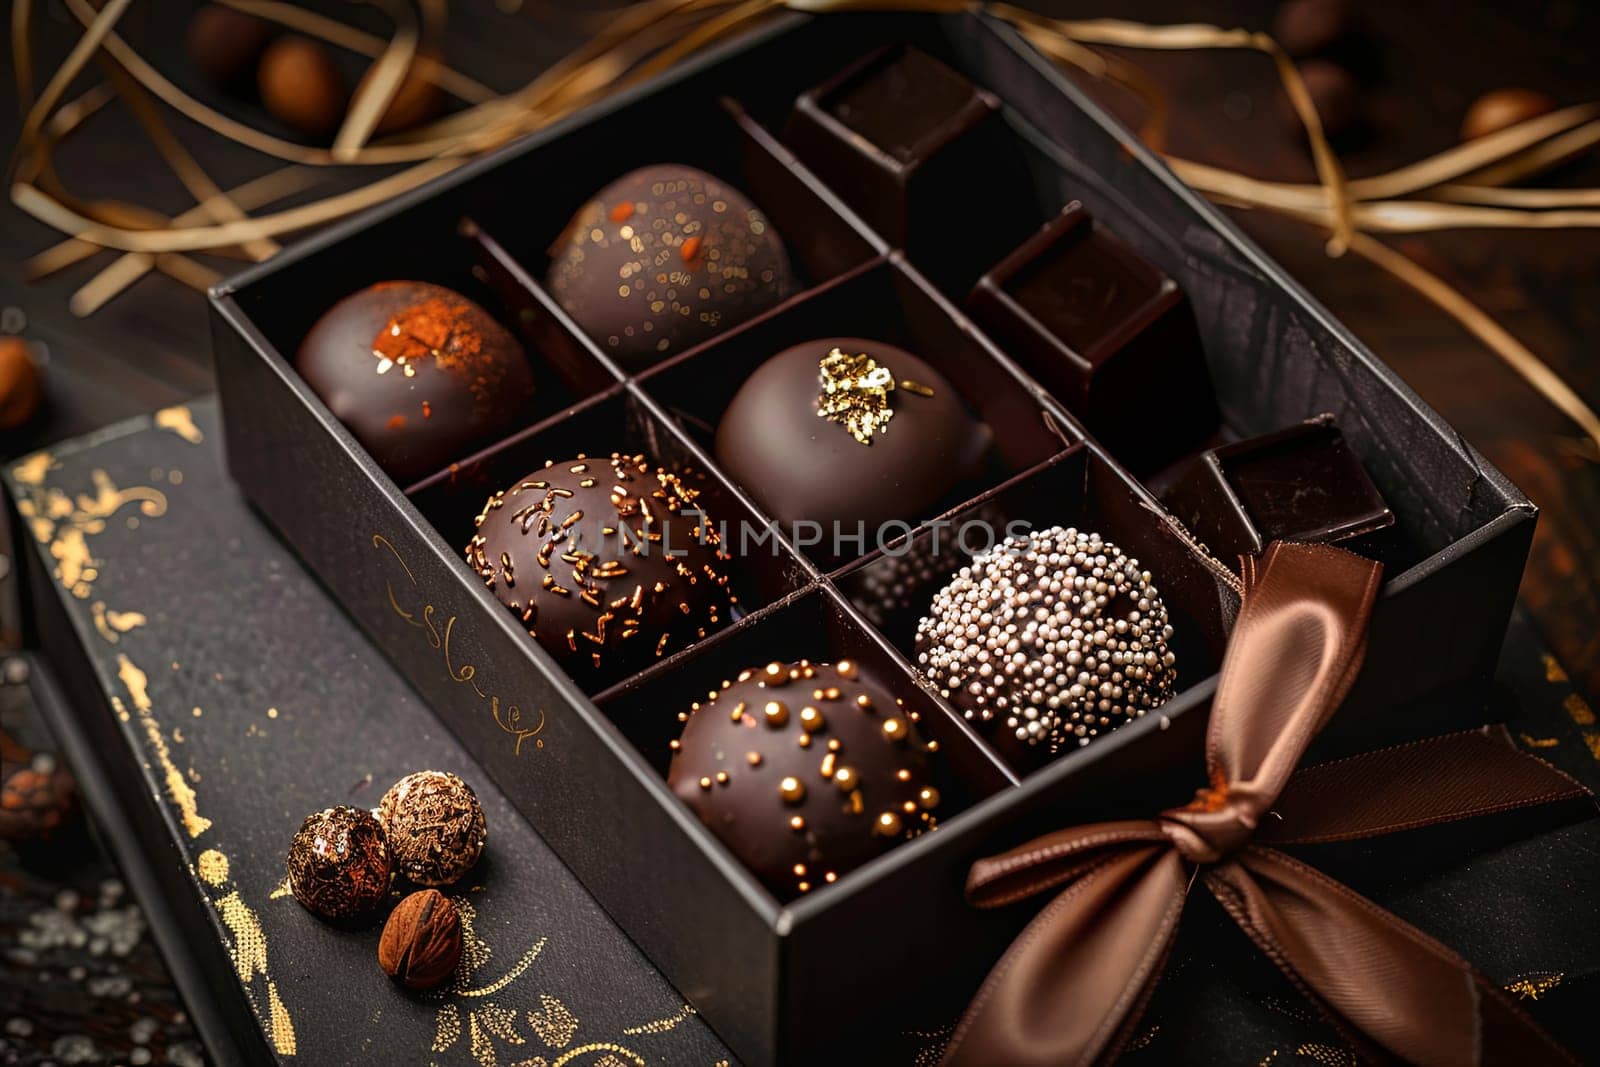 A luxurious box filled with an assortment of chocolate truffles, elegantly decorated with ribbons in rich dark colors.